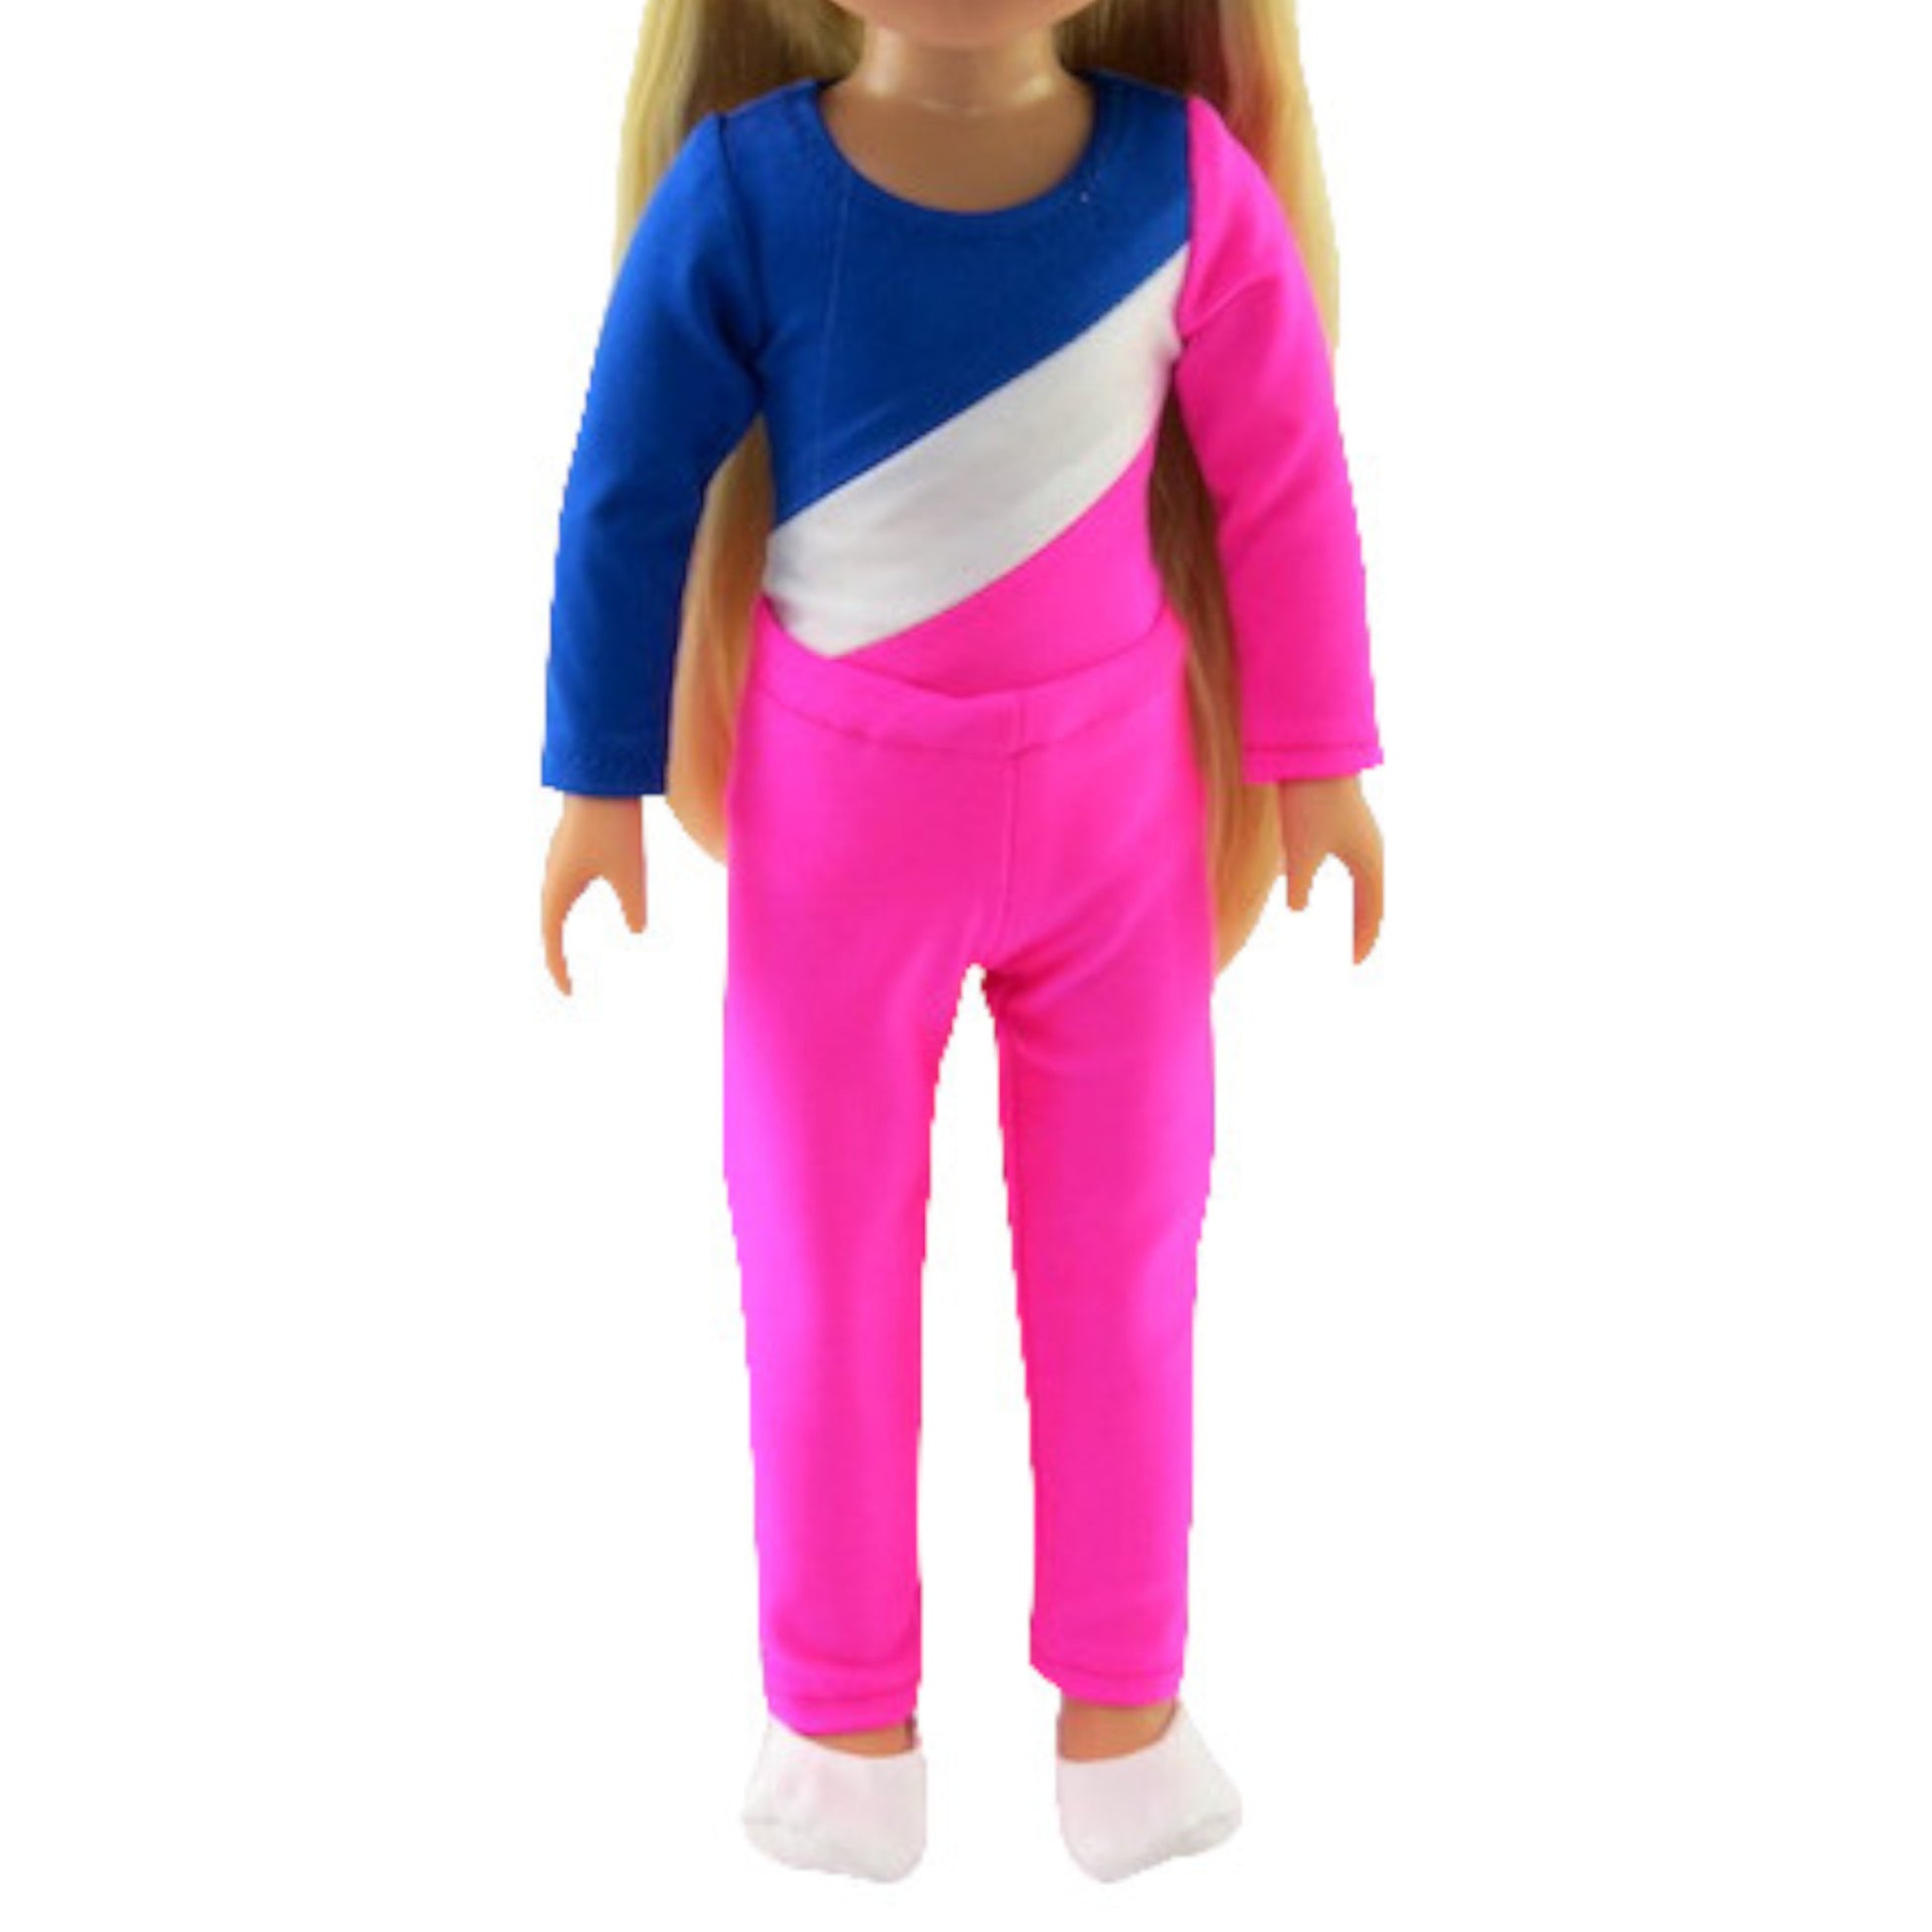 Blue, White, and Hot Pink Gymnastics for 14 1/2-inch dolls